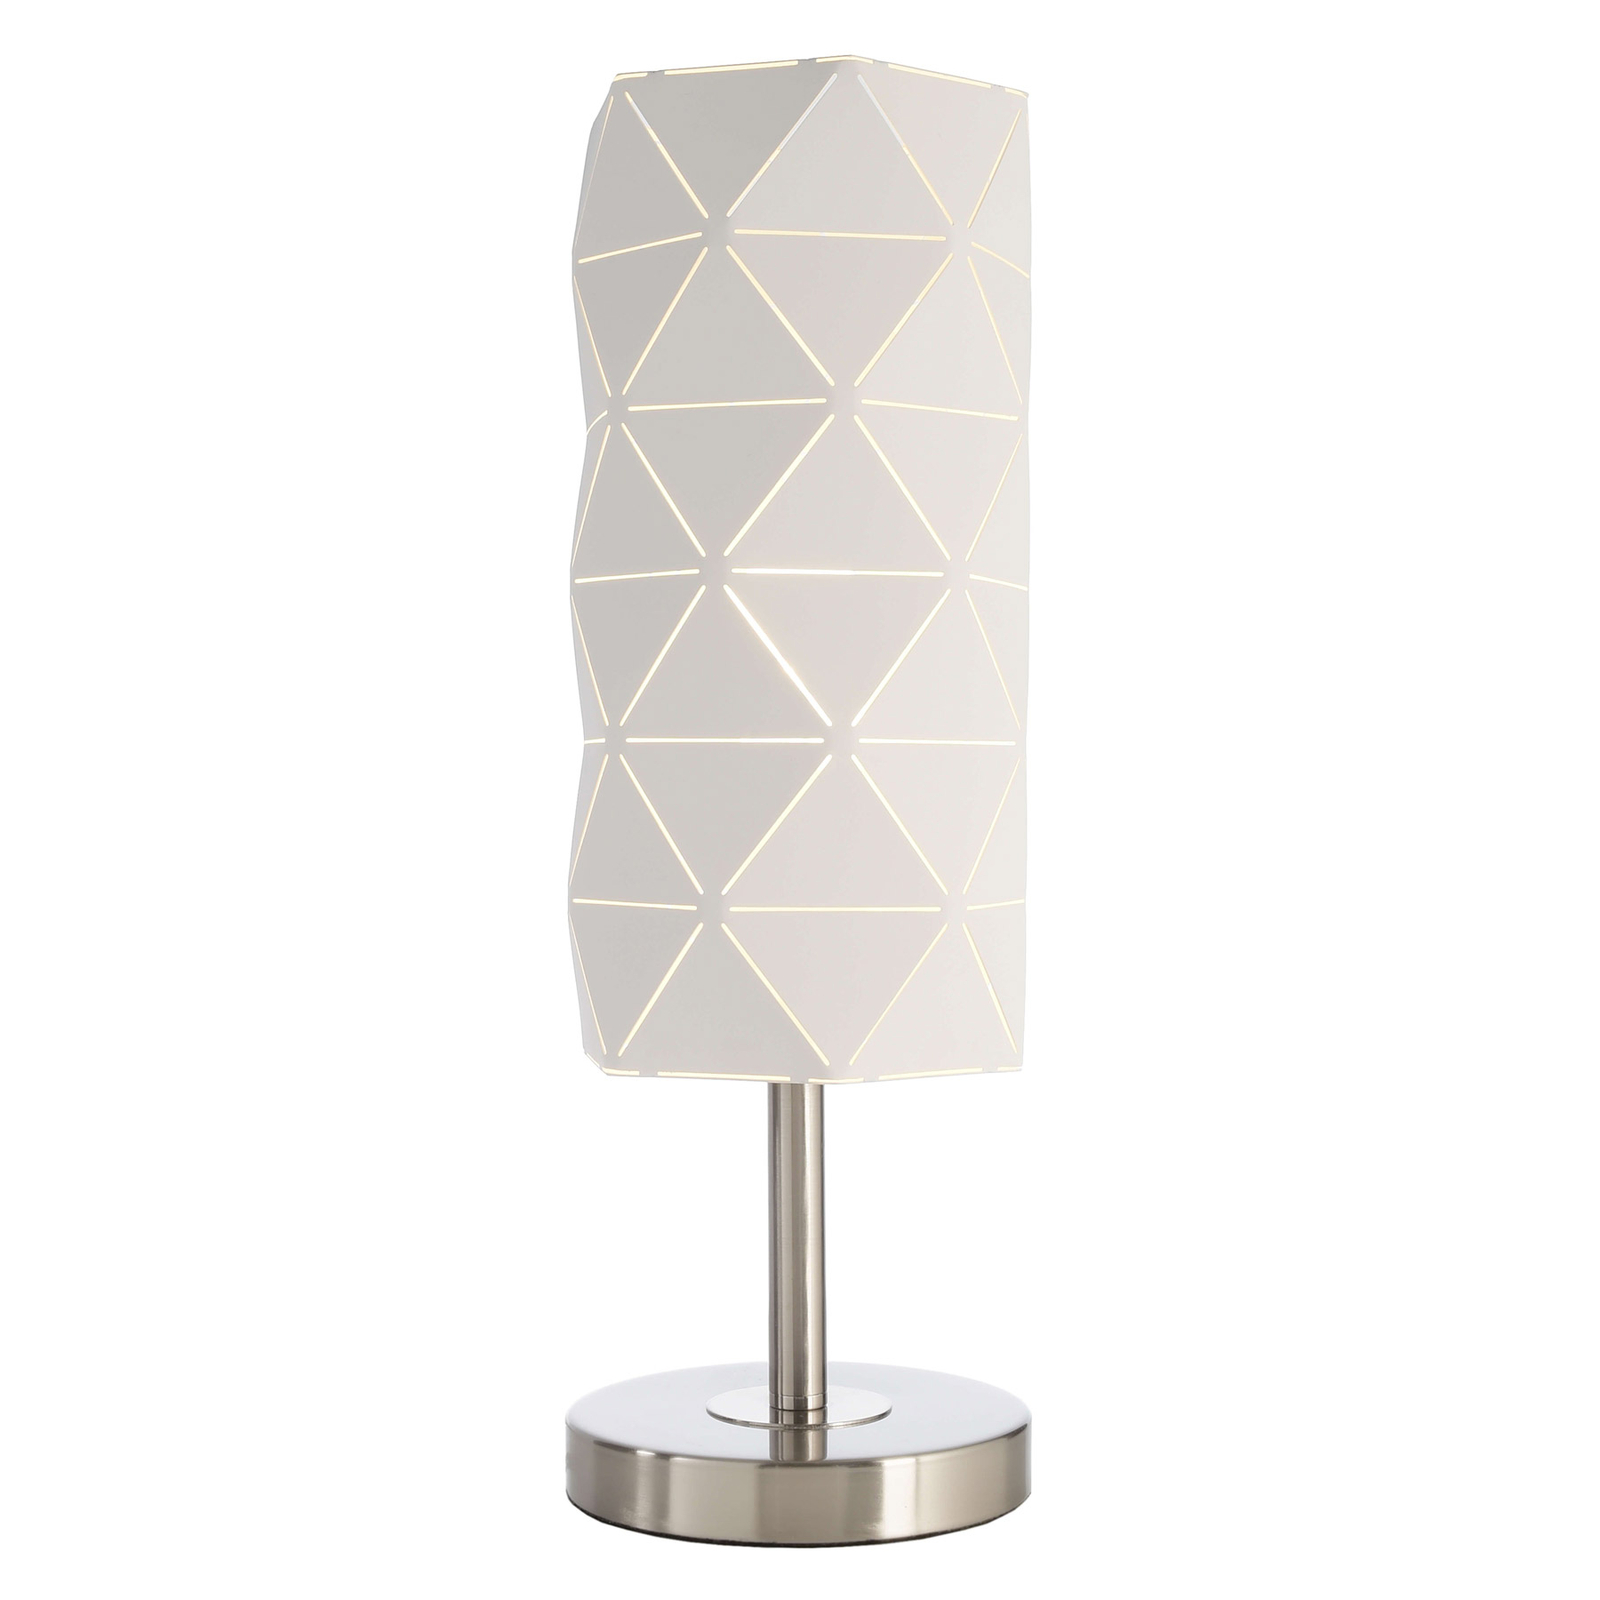 Asterope table lamp, linear white